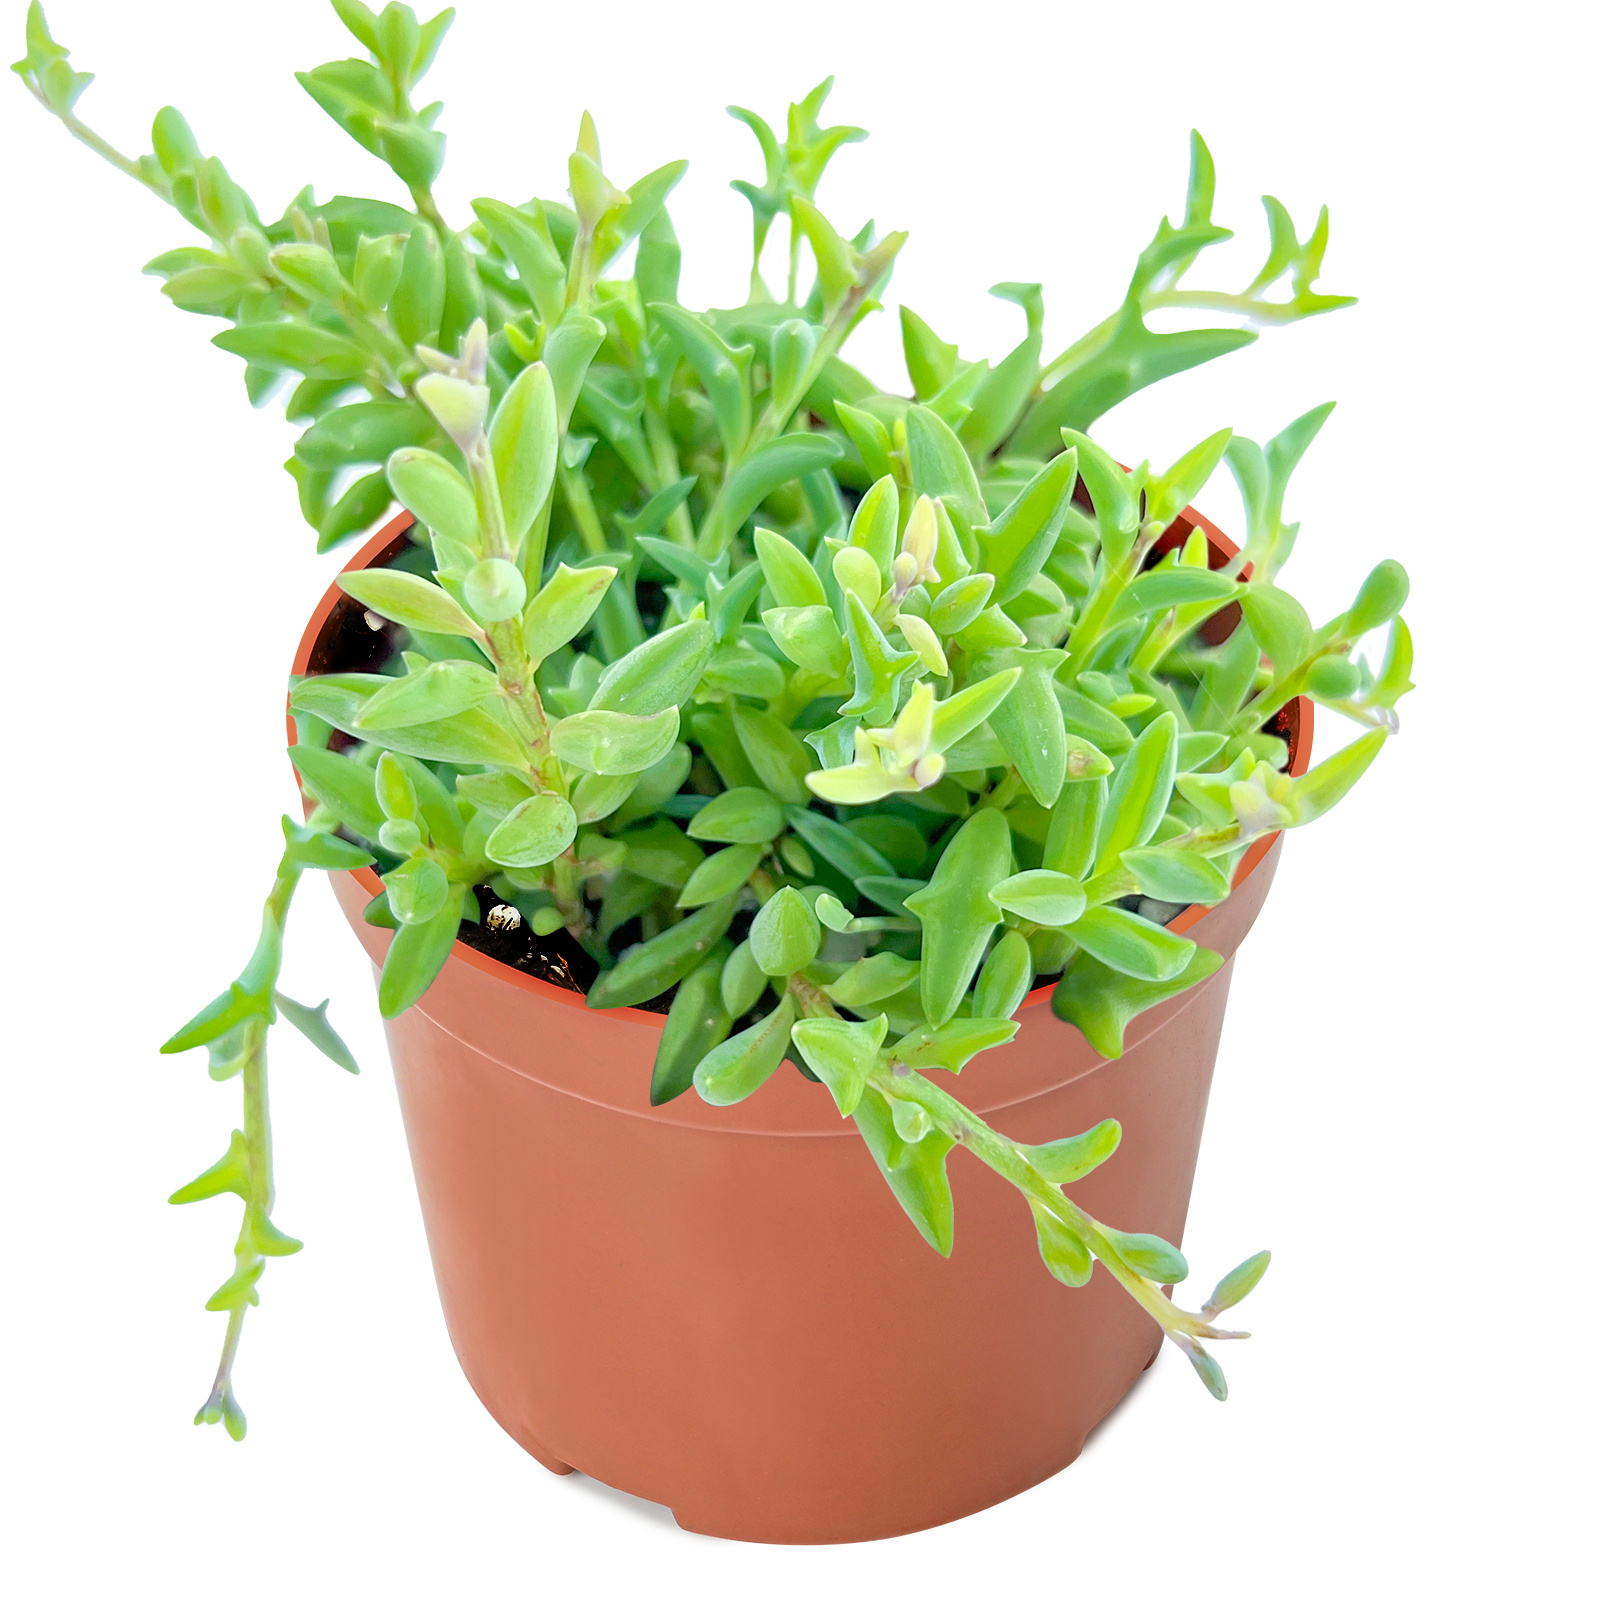 

Live Succulent (4" String Of Pearls), Succulents Plants Live, Succulent Plants Fully Rooted, Rare House Plant For Home Office Decoration